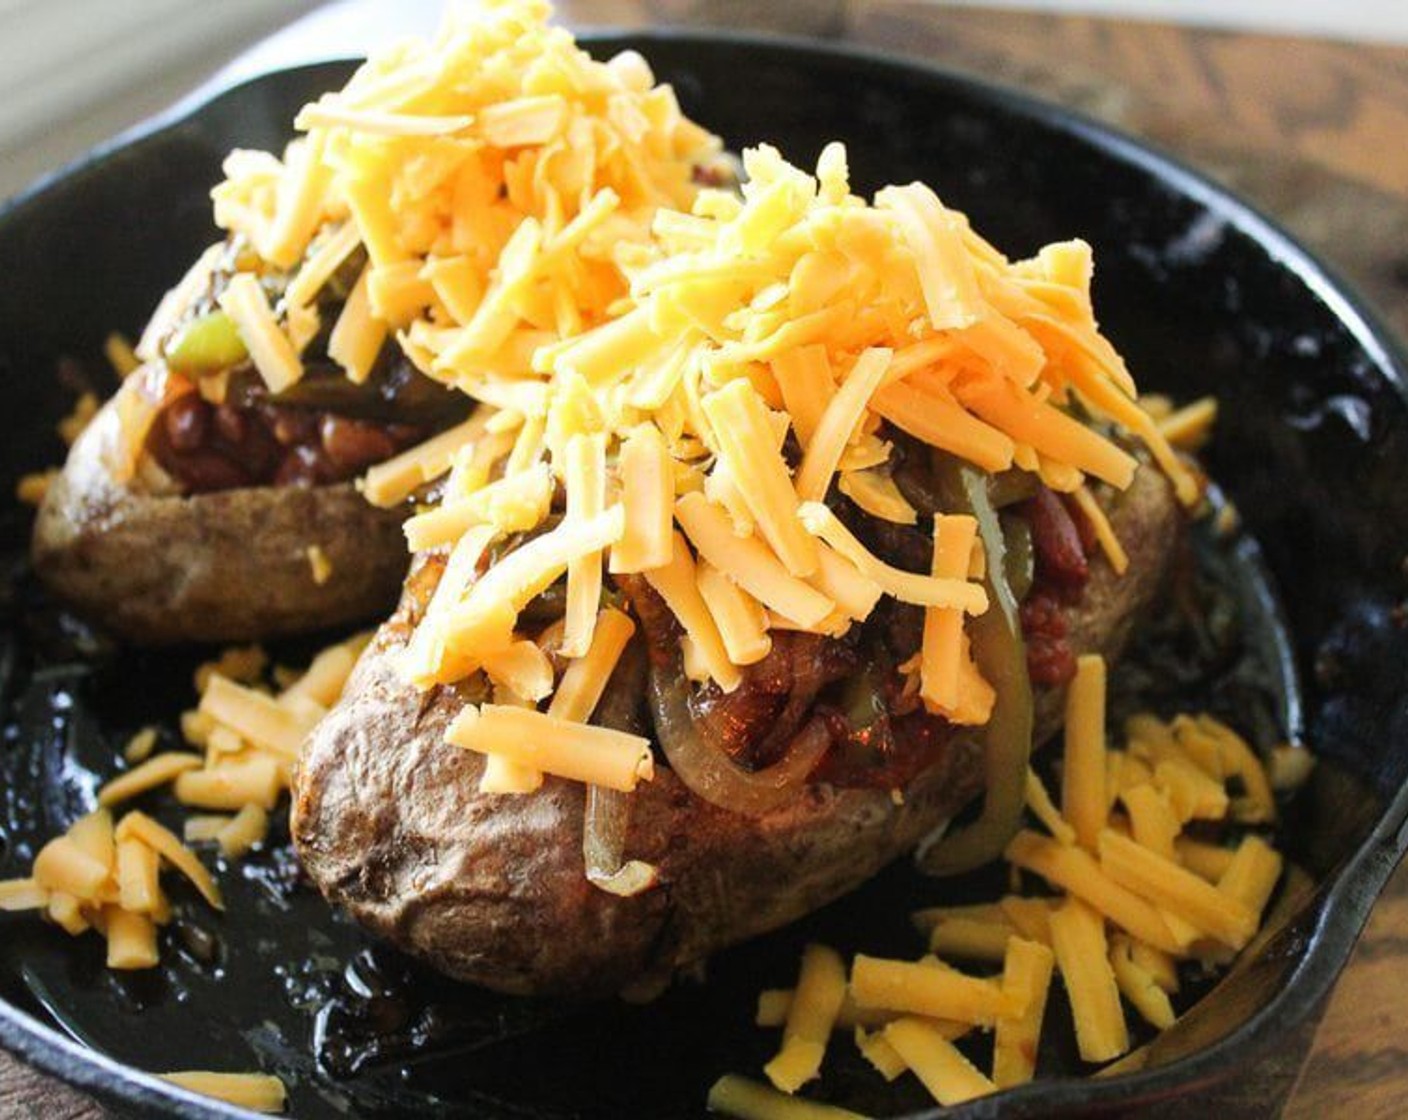 step 9 Top each chili potato evenly with onions and peppers, then with the Sharp Cheddar Cheese (1 cup).